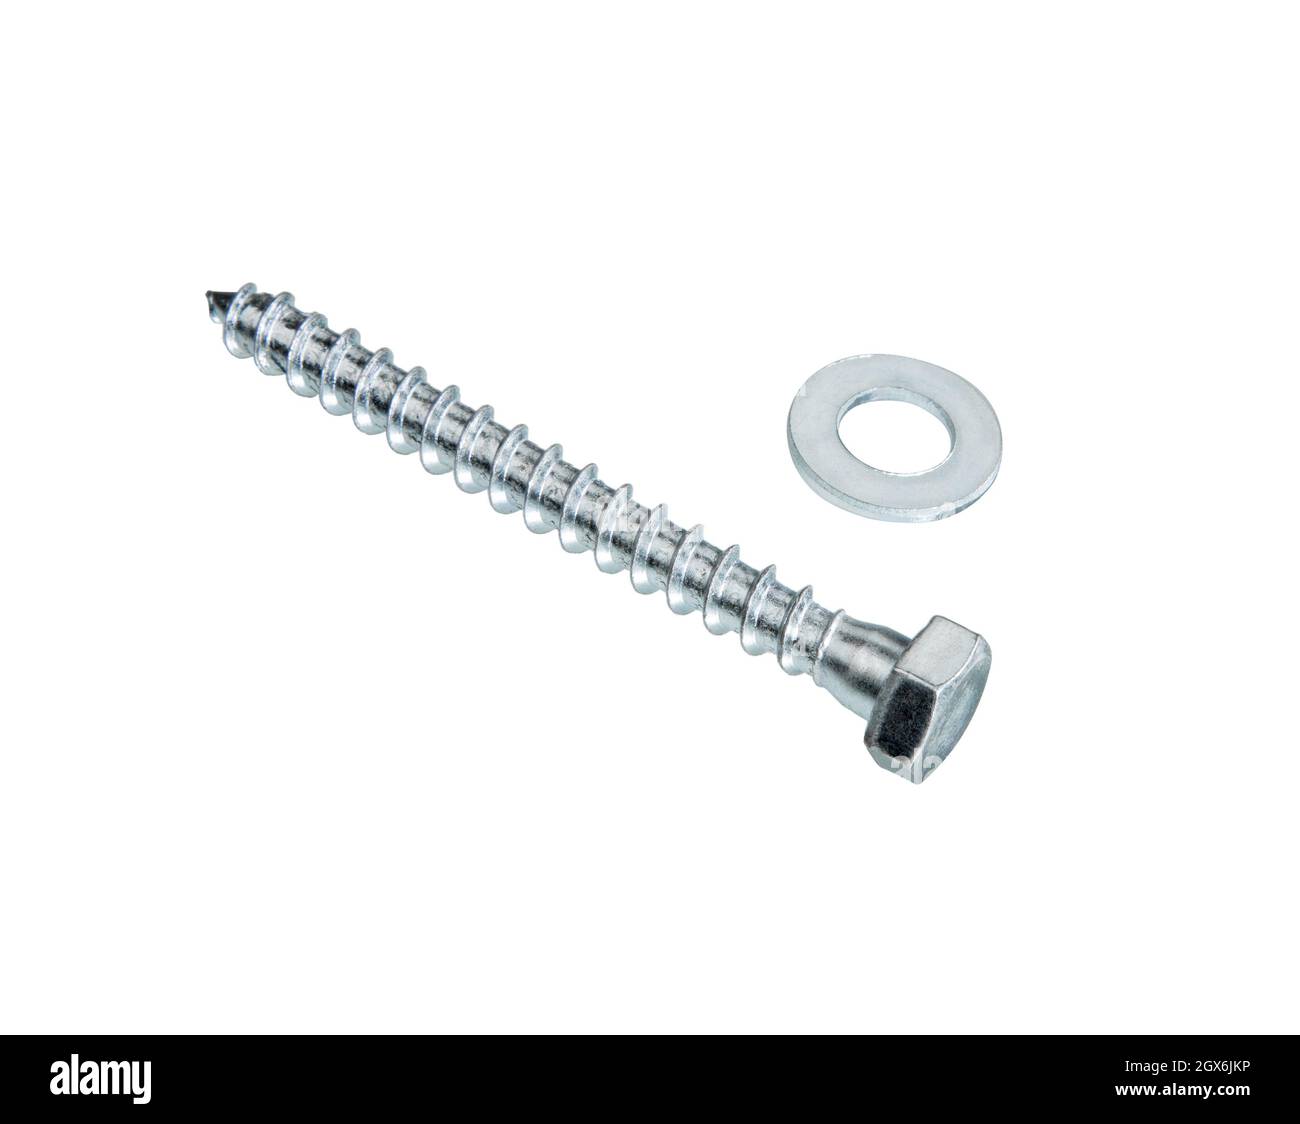 Screws  isolated on whited background. Self Tapping metal screws Close-up. Stock Photo